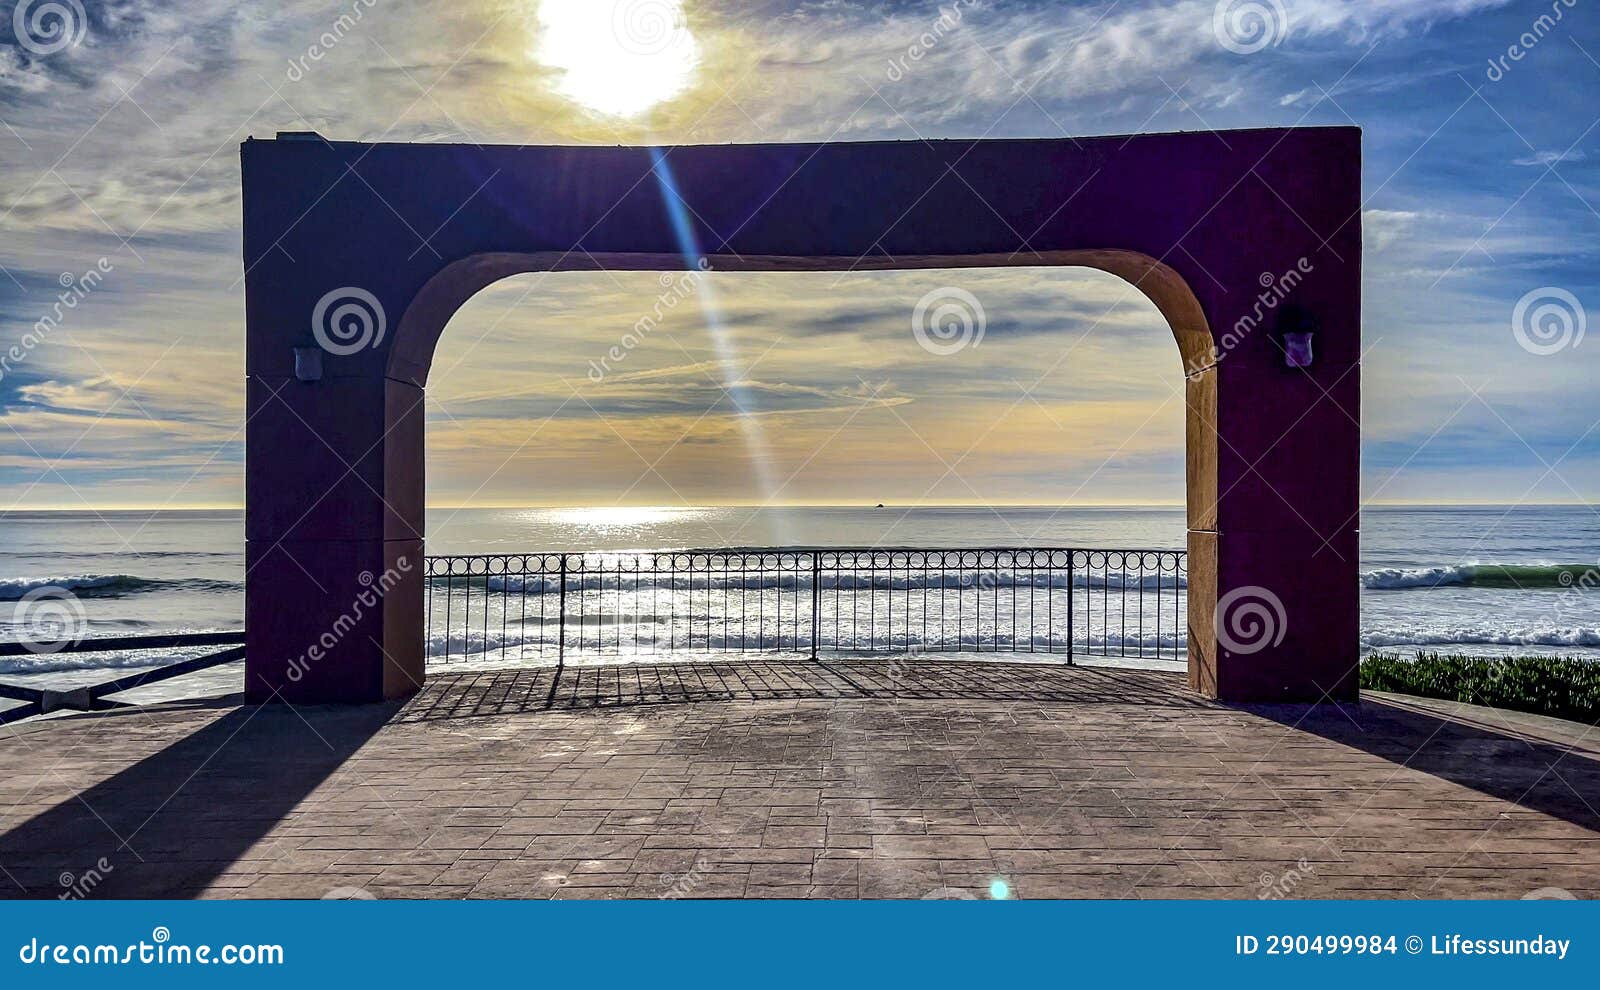 entrance and gateway to the pacific ocean in the fishing village of puerto nuevo in the state of baja california in mexico.